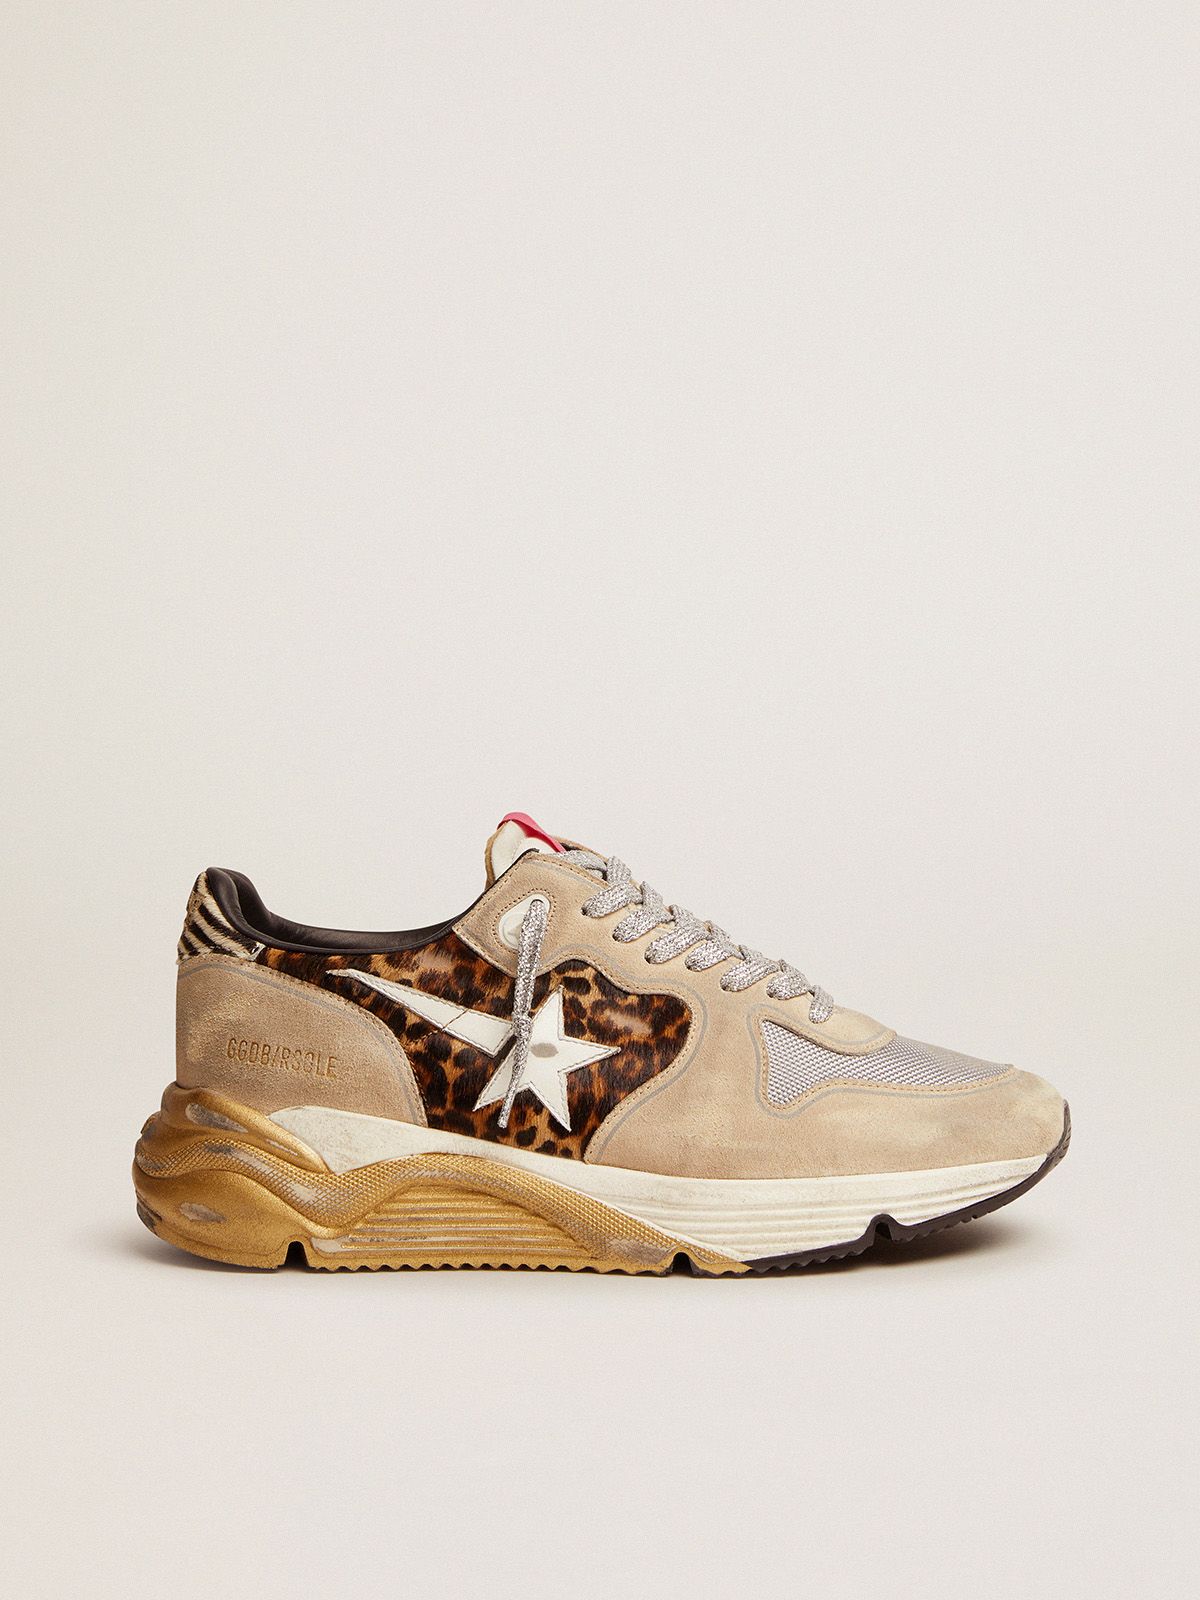 Running Sole LTD sneakers in leopard-print pony skin and suede with mesh insert